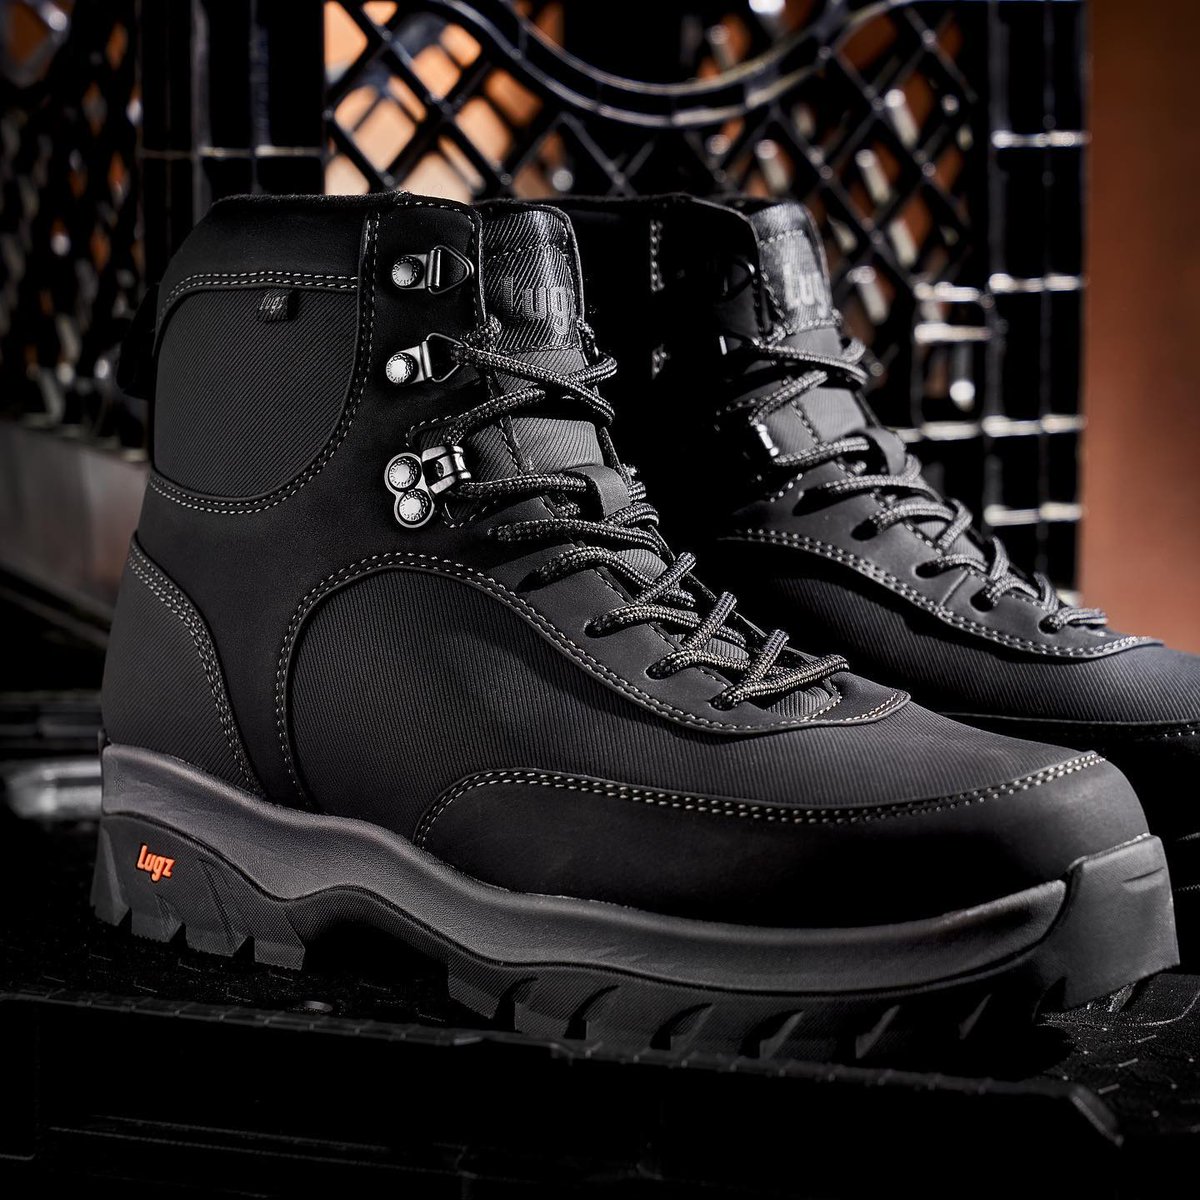 Enter to win the @LugzNYC Men’s Diablo Hi Boots for #FathersDay2023! #Giveaway open to US & ends 6/14. 👉🏽 bit.ly/3N48CVd #gifted #Lugz #WalkWithUs #Menswear #Fashion